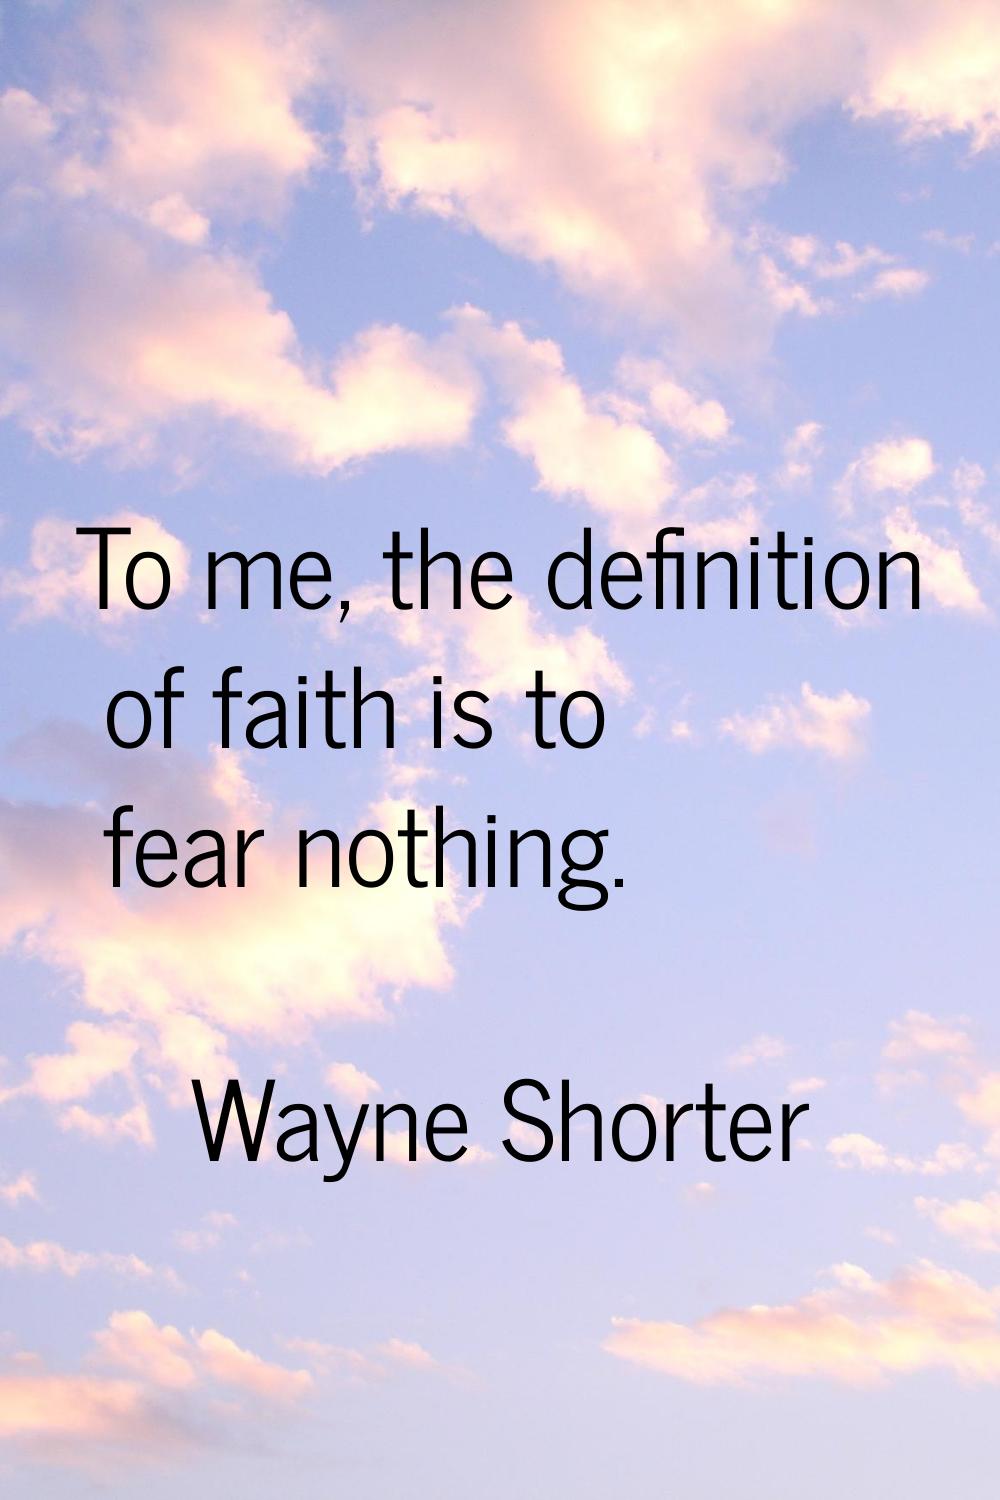 To me, the definition of faith is to fear nothing.